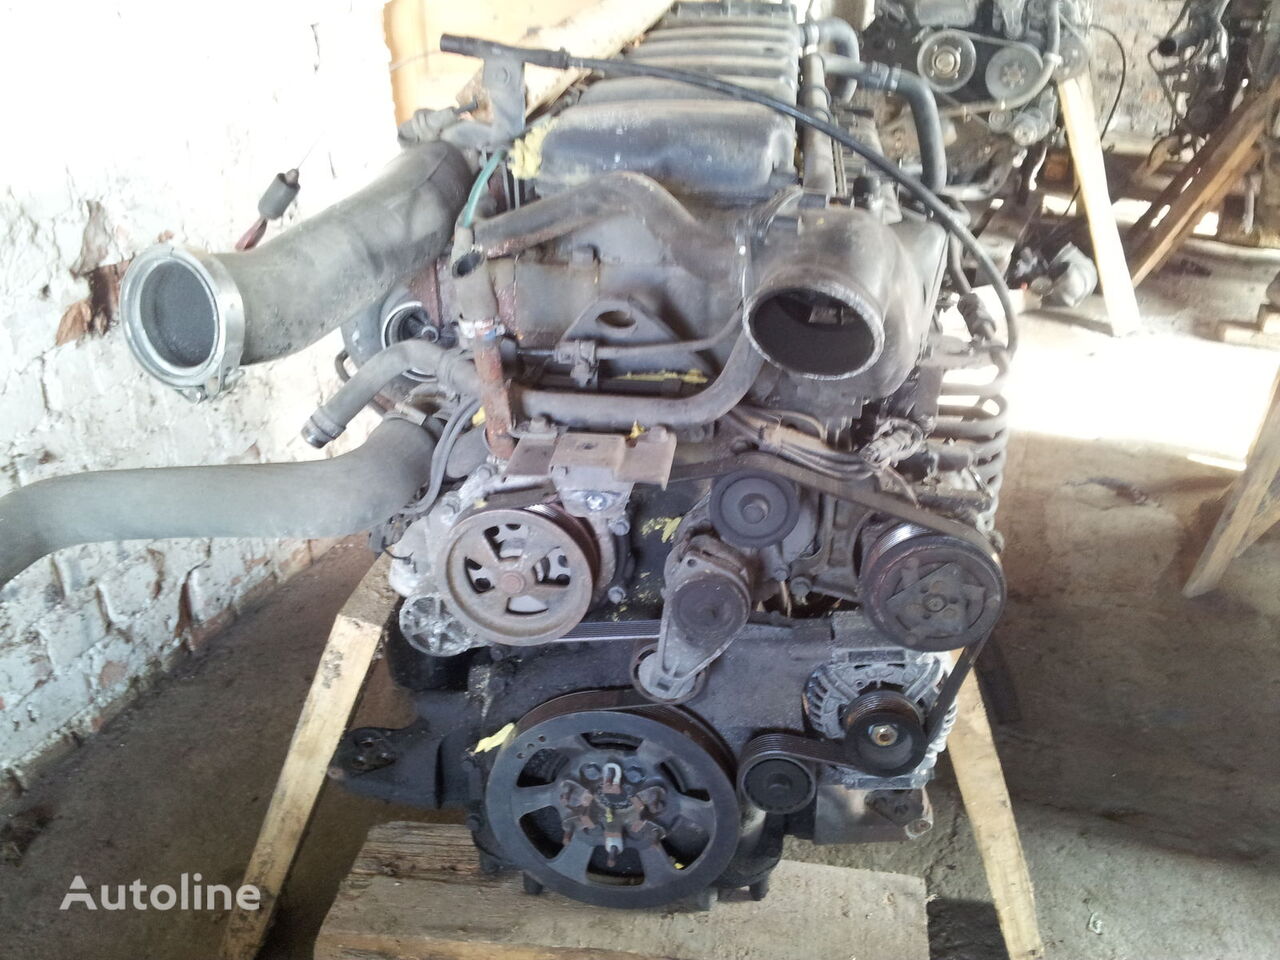 Scania series HPI, DC1214, DC1210, DC1215 DC1216, DC1217, DC1218, DC122 engine for Scania R truck tractor